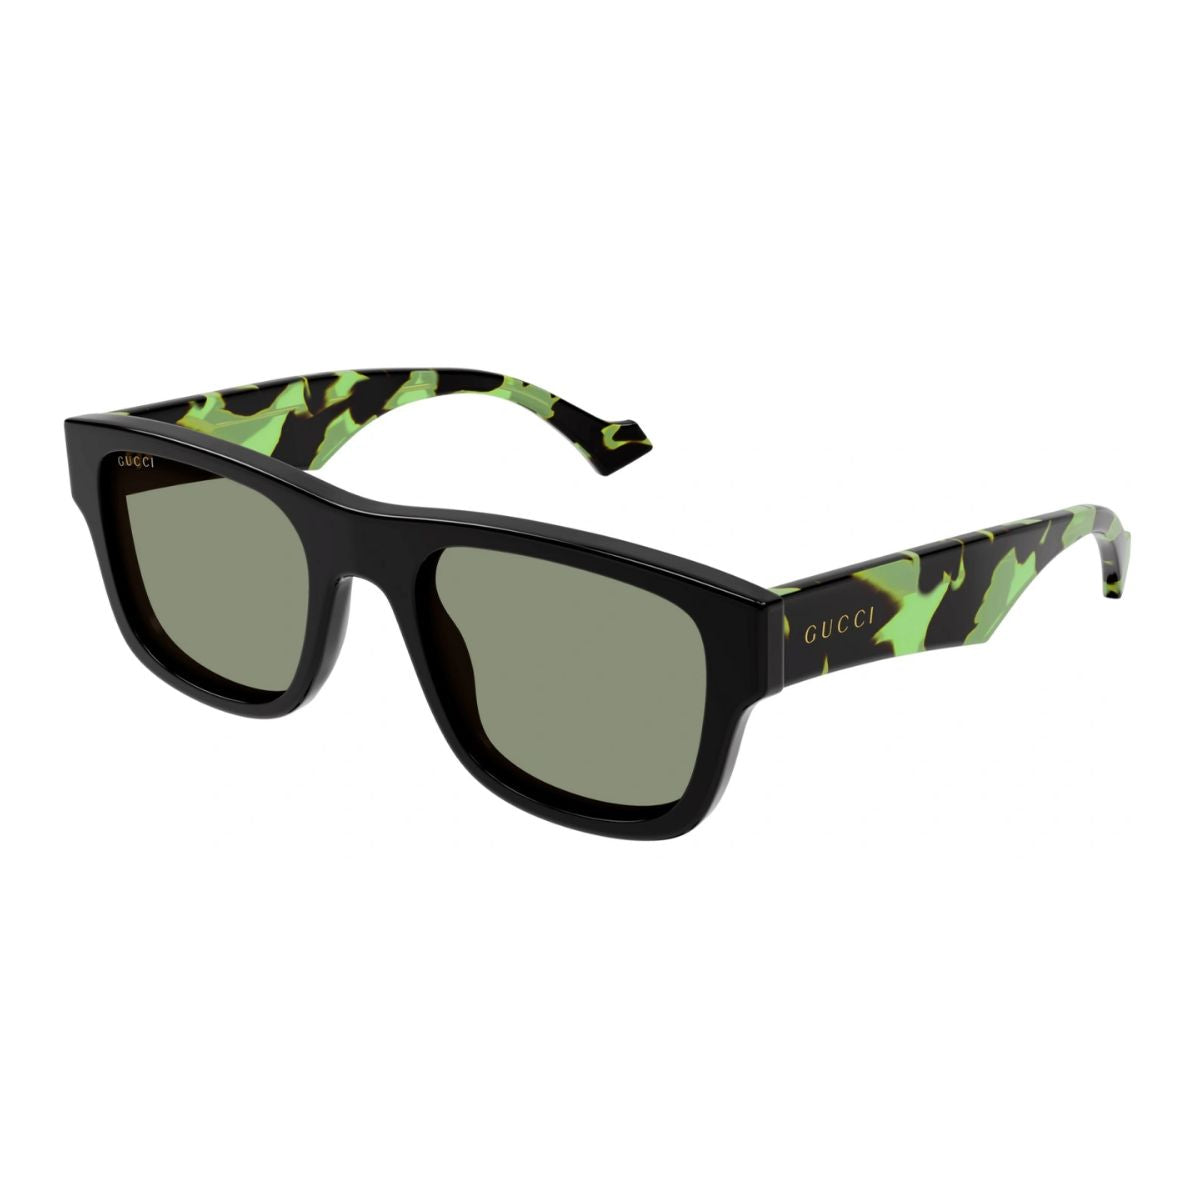 "Gucci GG1427S 005 Shades for Men - Optorium"